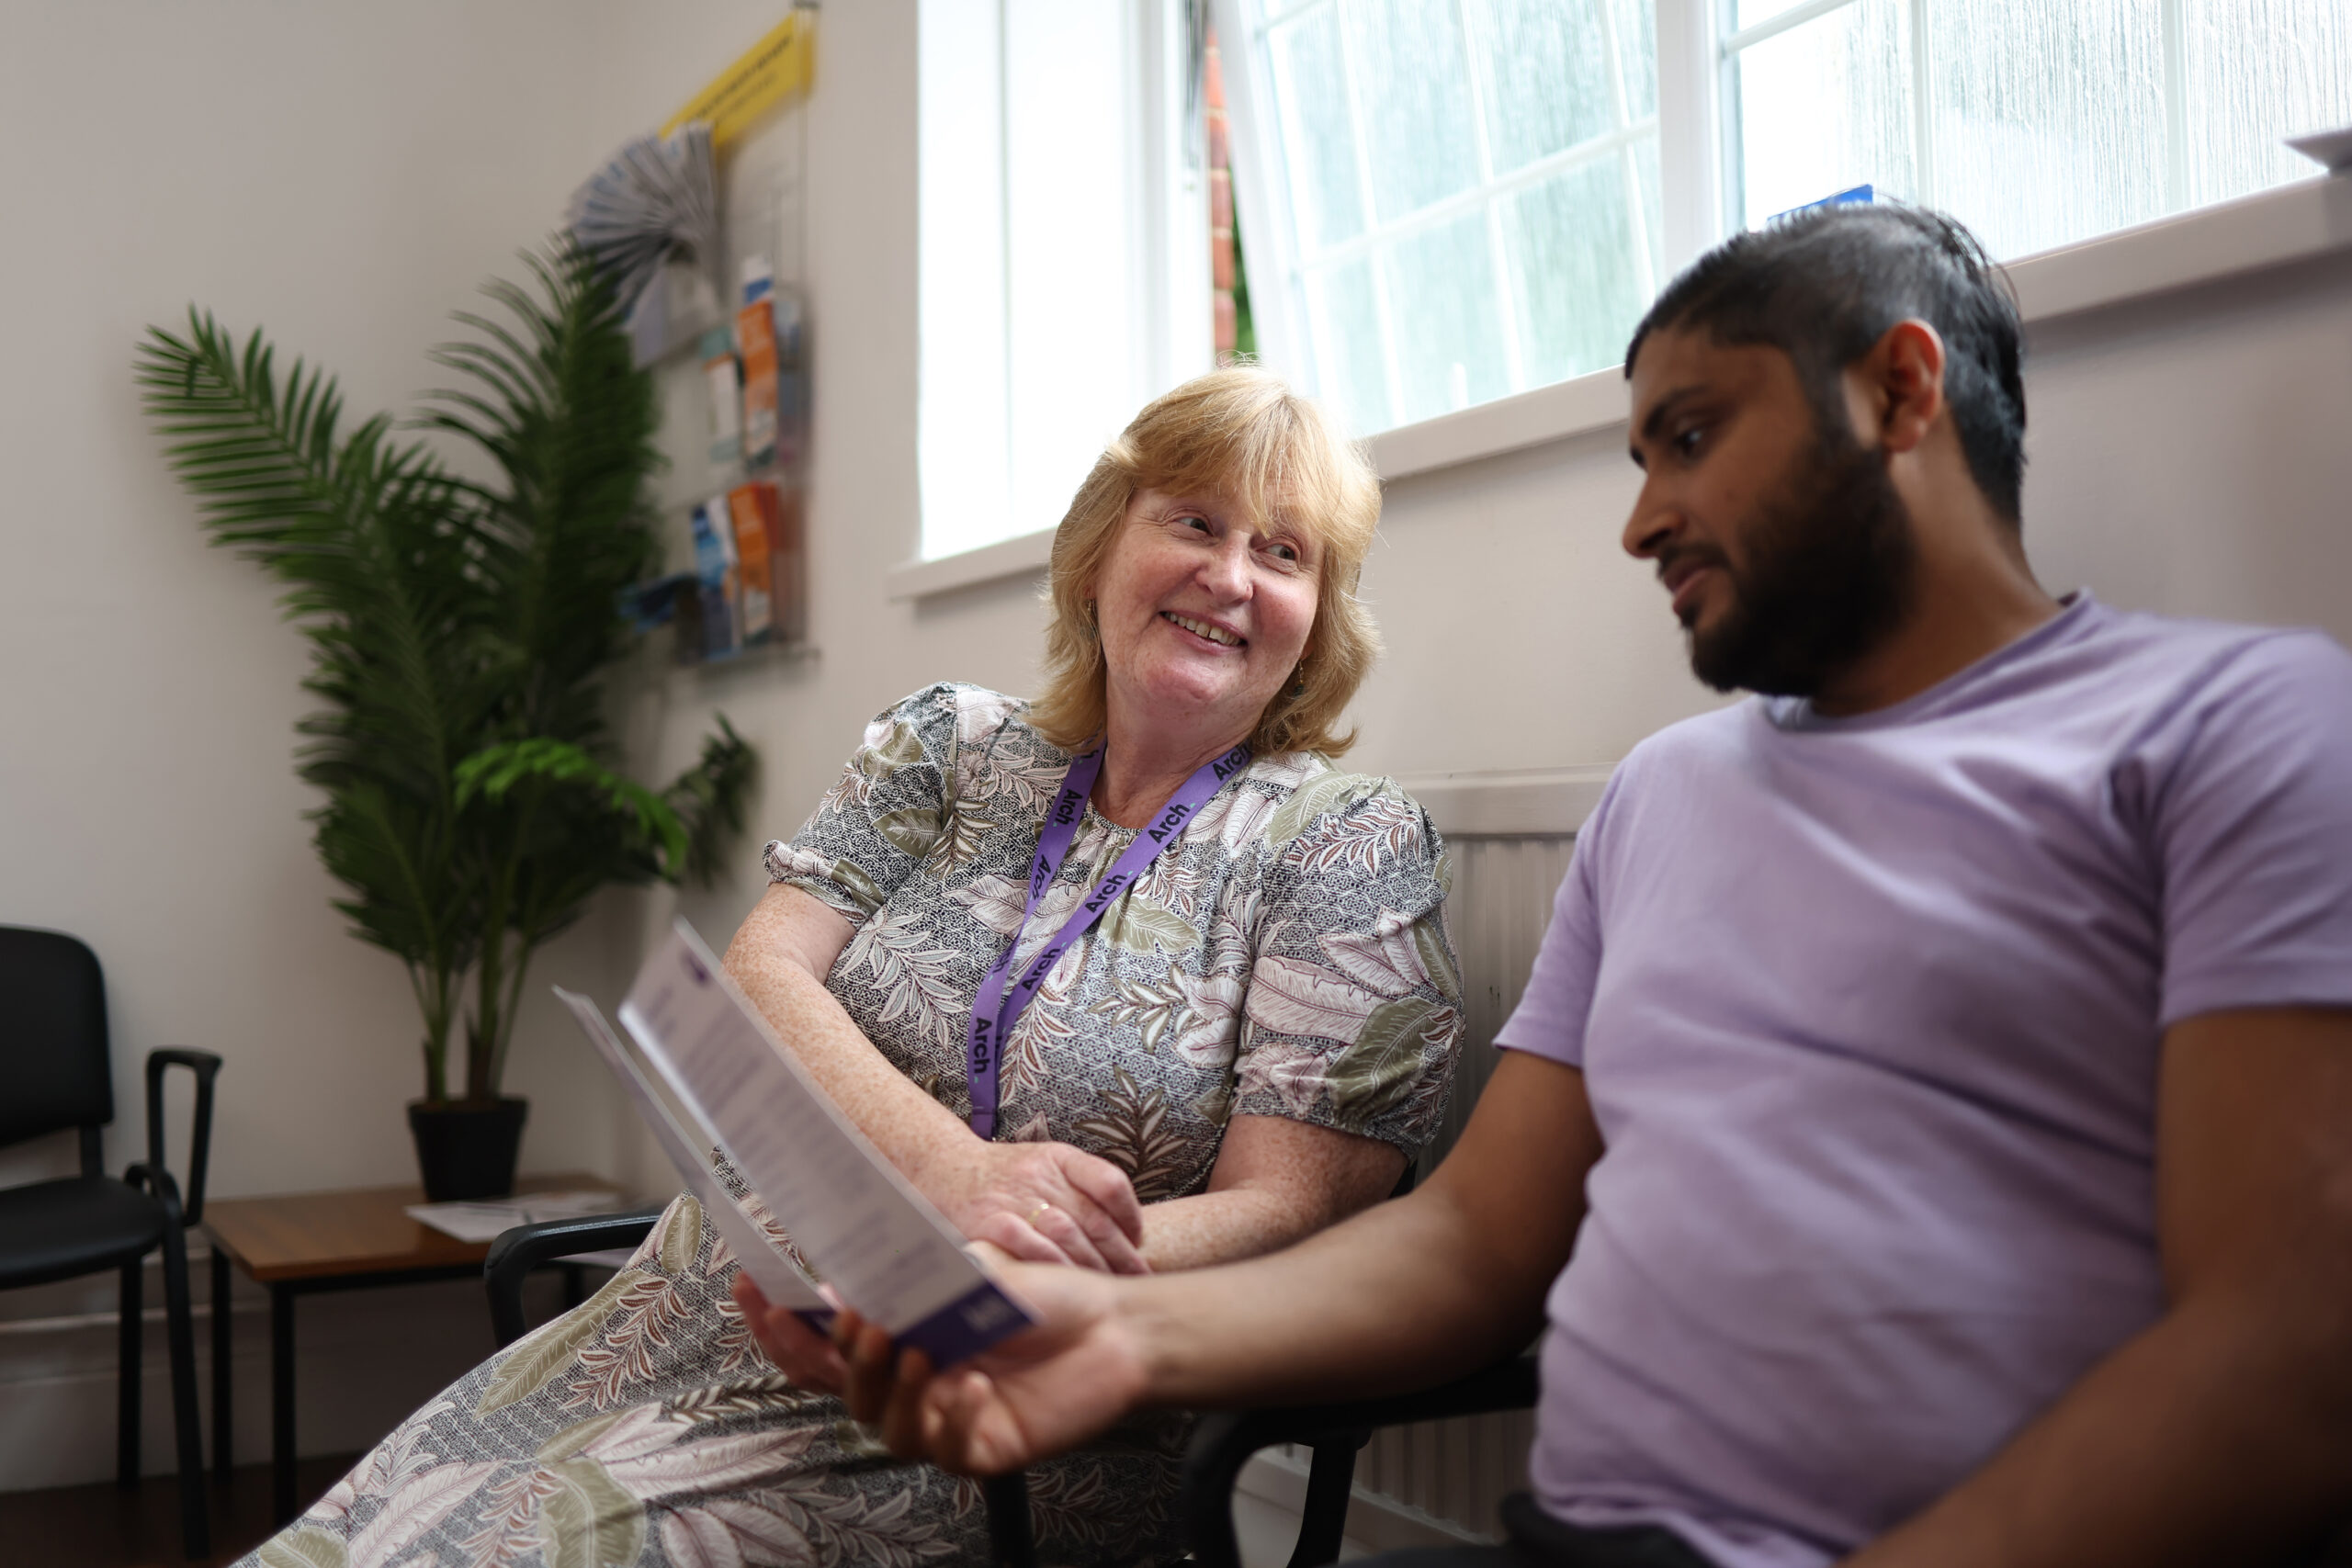 Patient and receptionist sitting together in the waiting room talking through a leaflet together, looking at leaflet and smiling